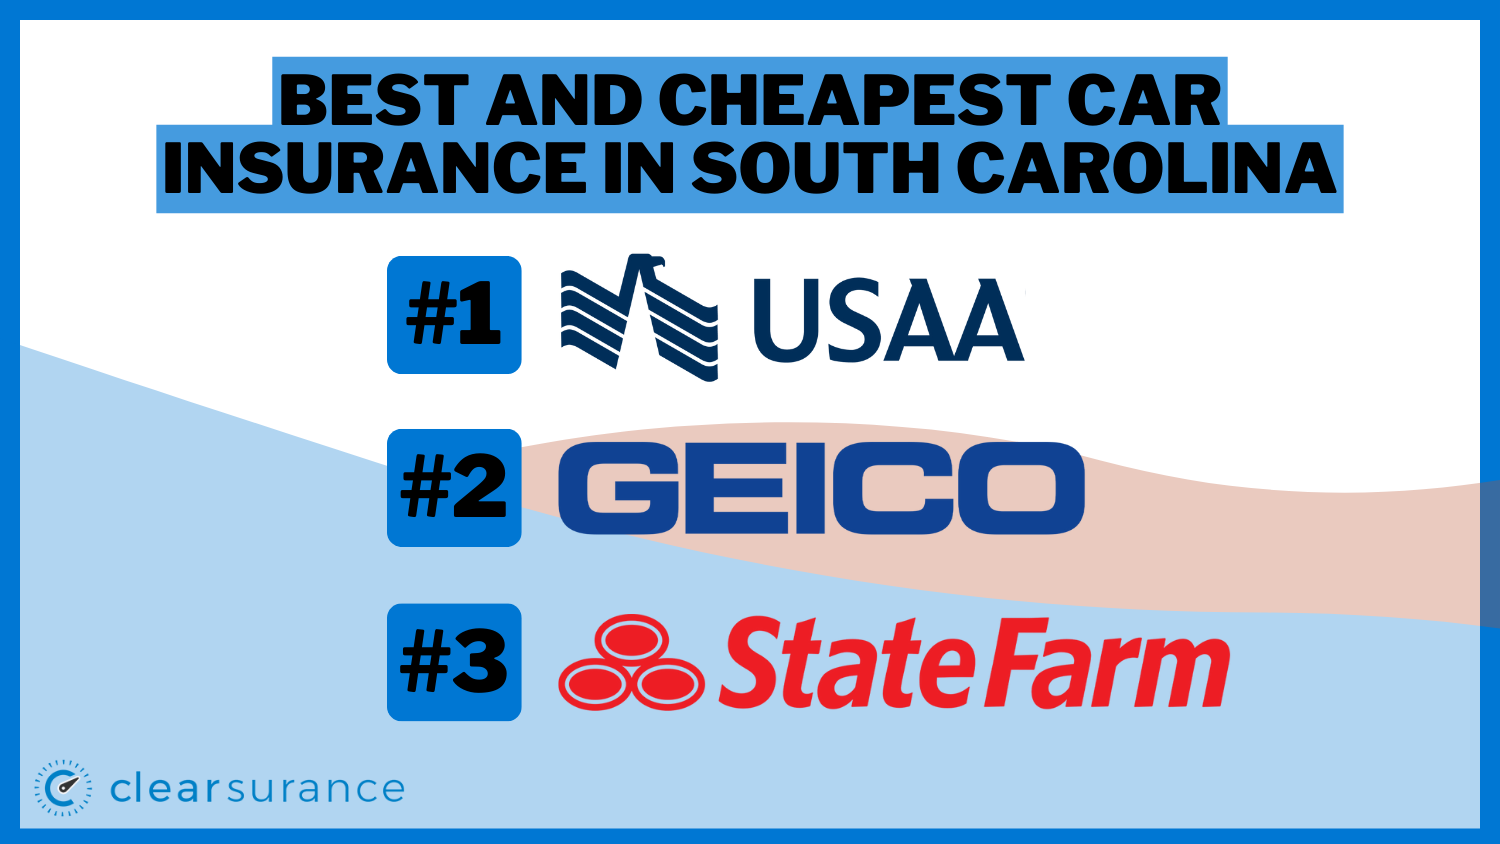 Best and Cheapest Car Insurance in South Carolina